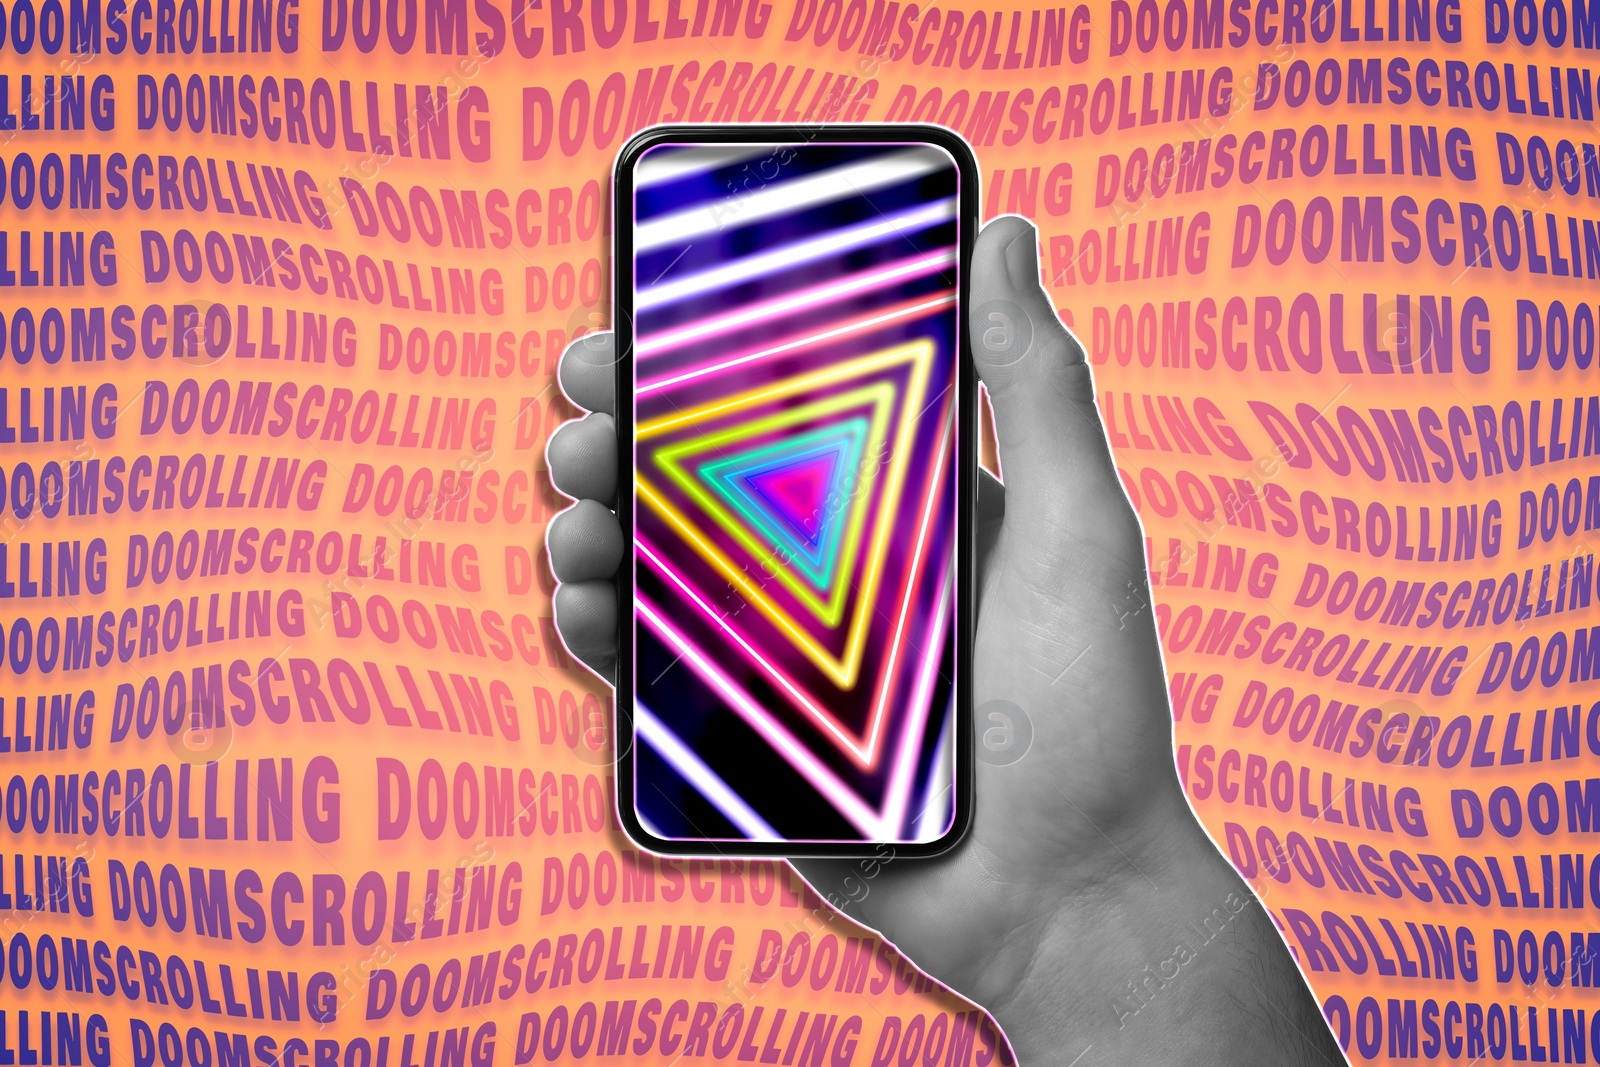 Image of Doomscrolling concept. Man holding mobile phone with geometric pattern on screen against bright background with words